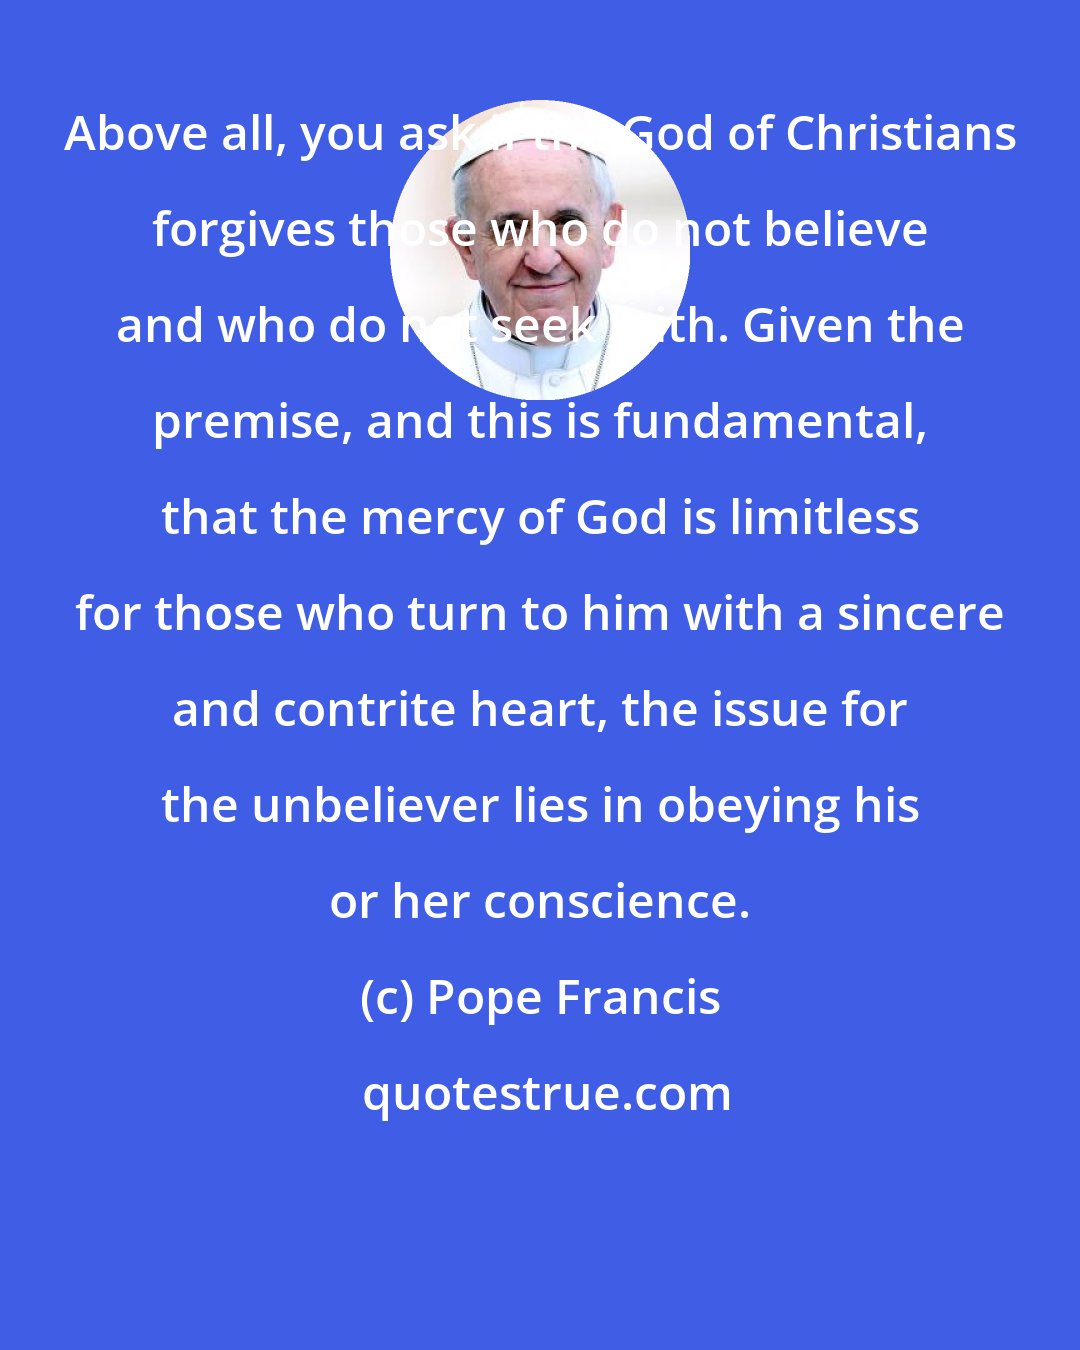 Pope Francis: Above all, you ask if the God of Christians forgives those who do not believe and who do not seek faith. Given the premise, and this is fundamental, that the mercy of God is limitless for those who turn to him with a sincere and contrite heart, the issue for the unbeliever lies in obeying his or her conscience.